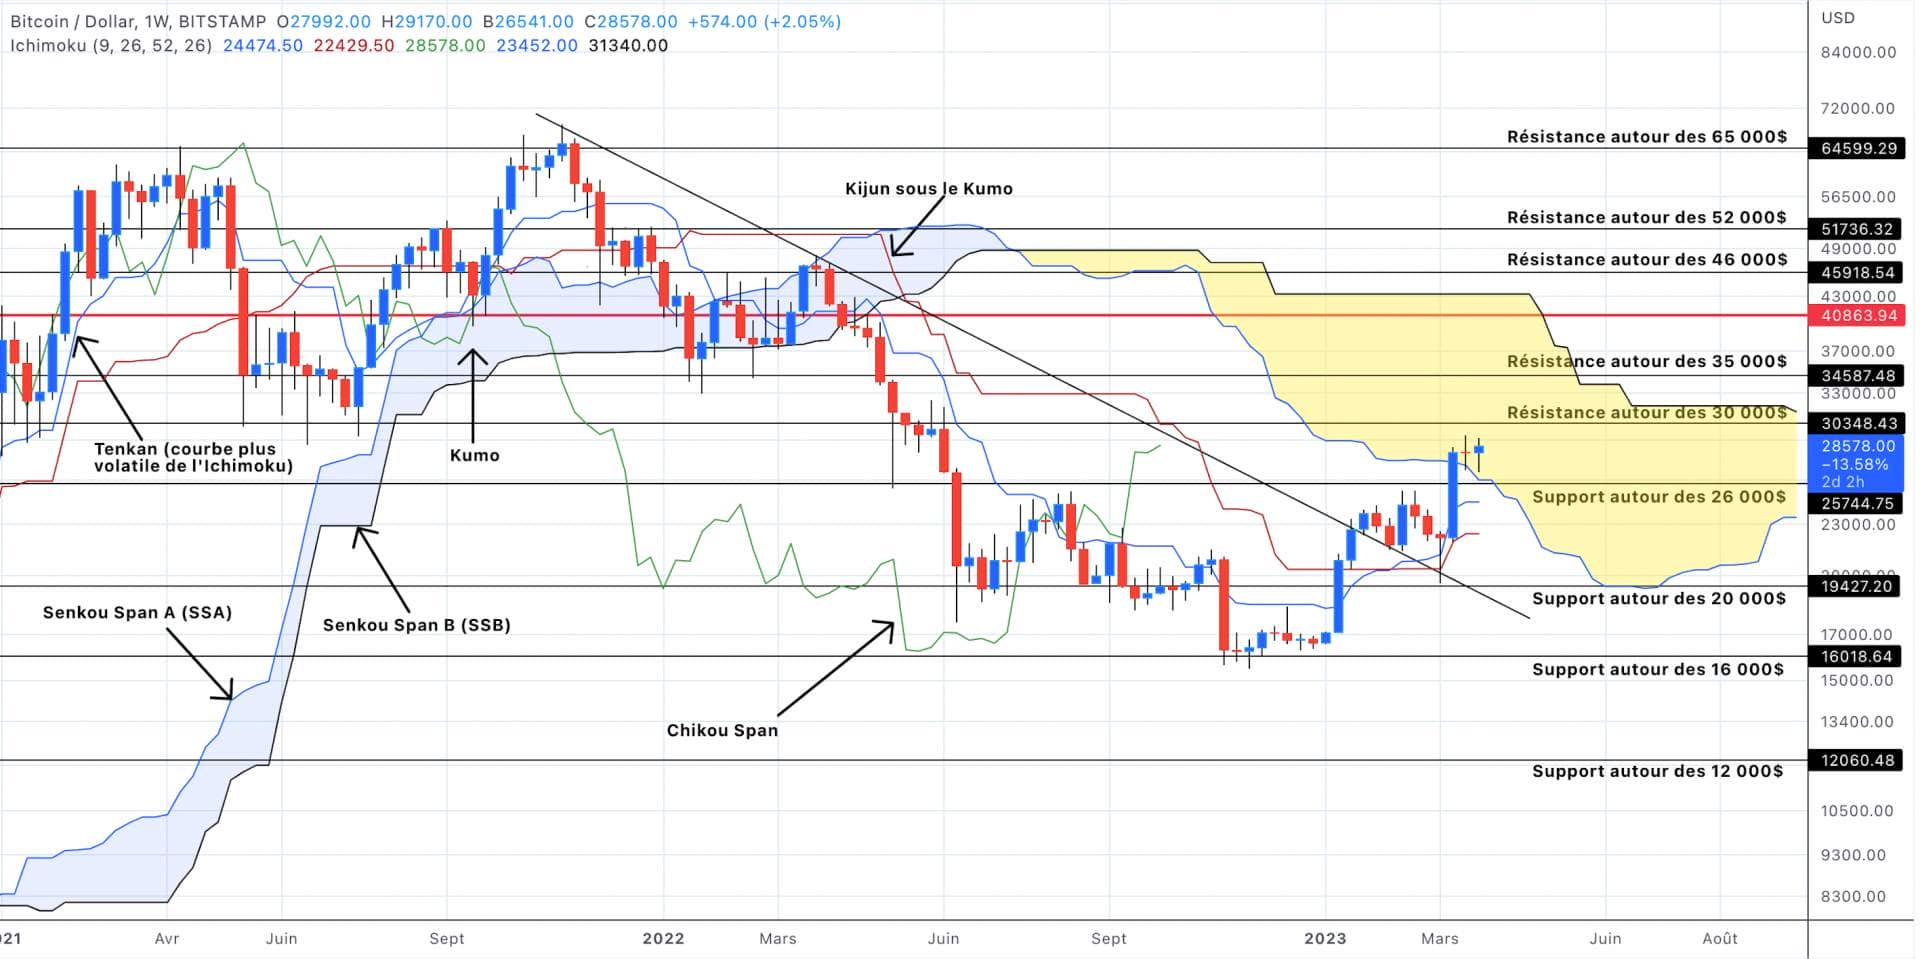 Bitcoin price analysis in weekly units - April 01, 2023